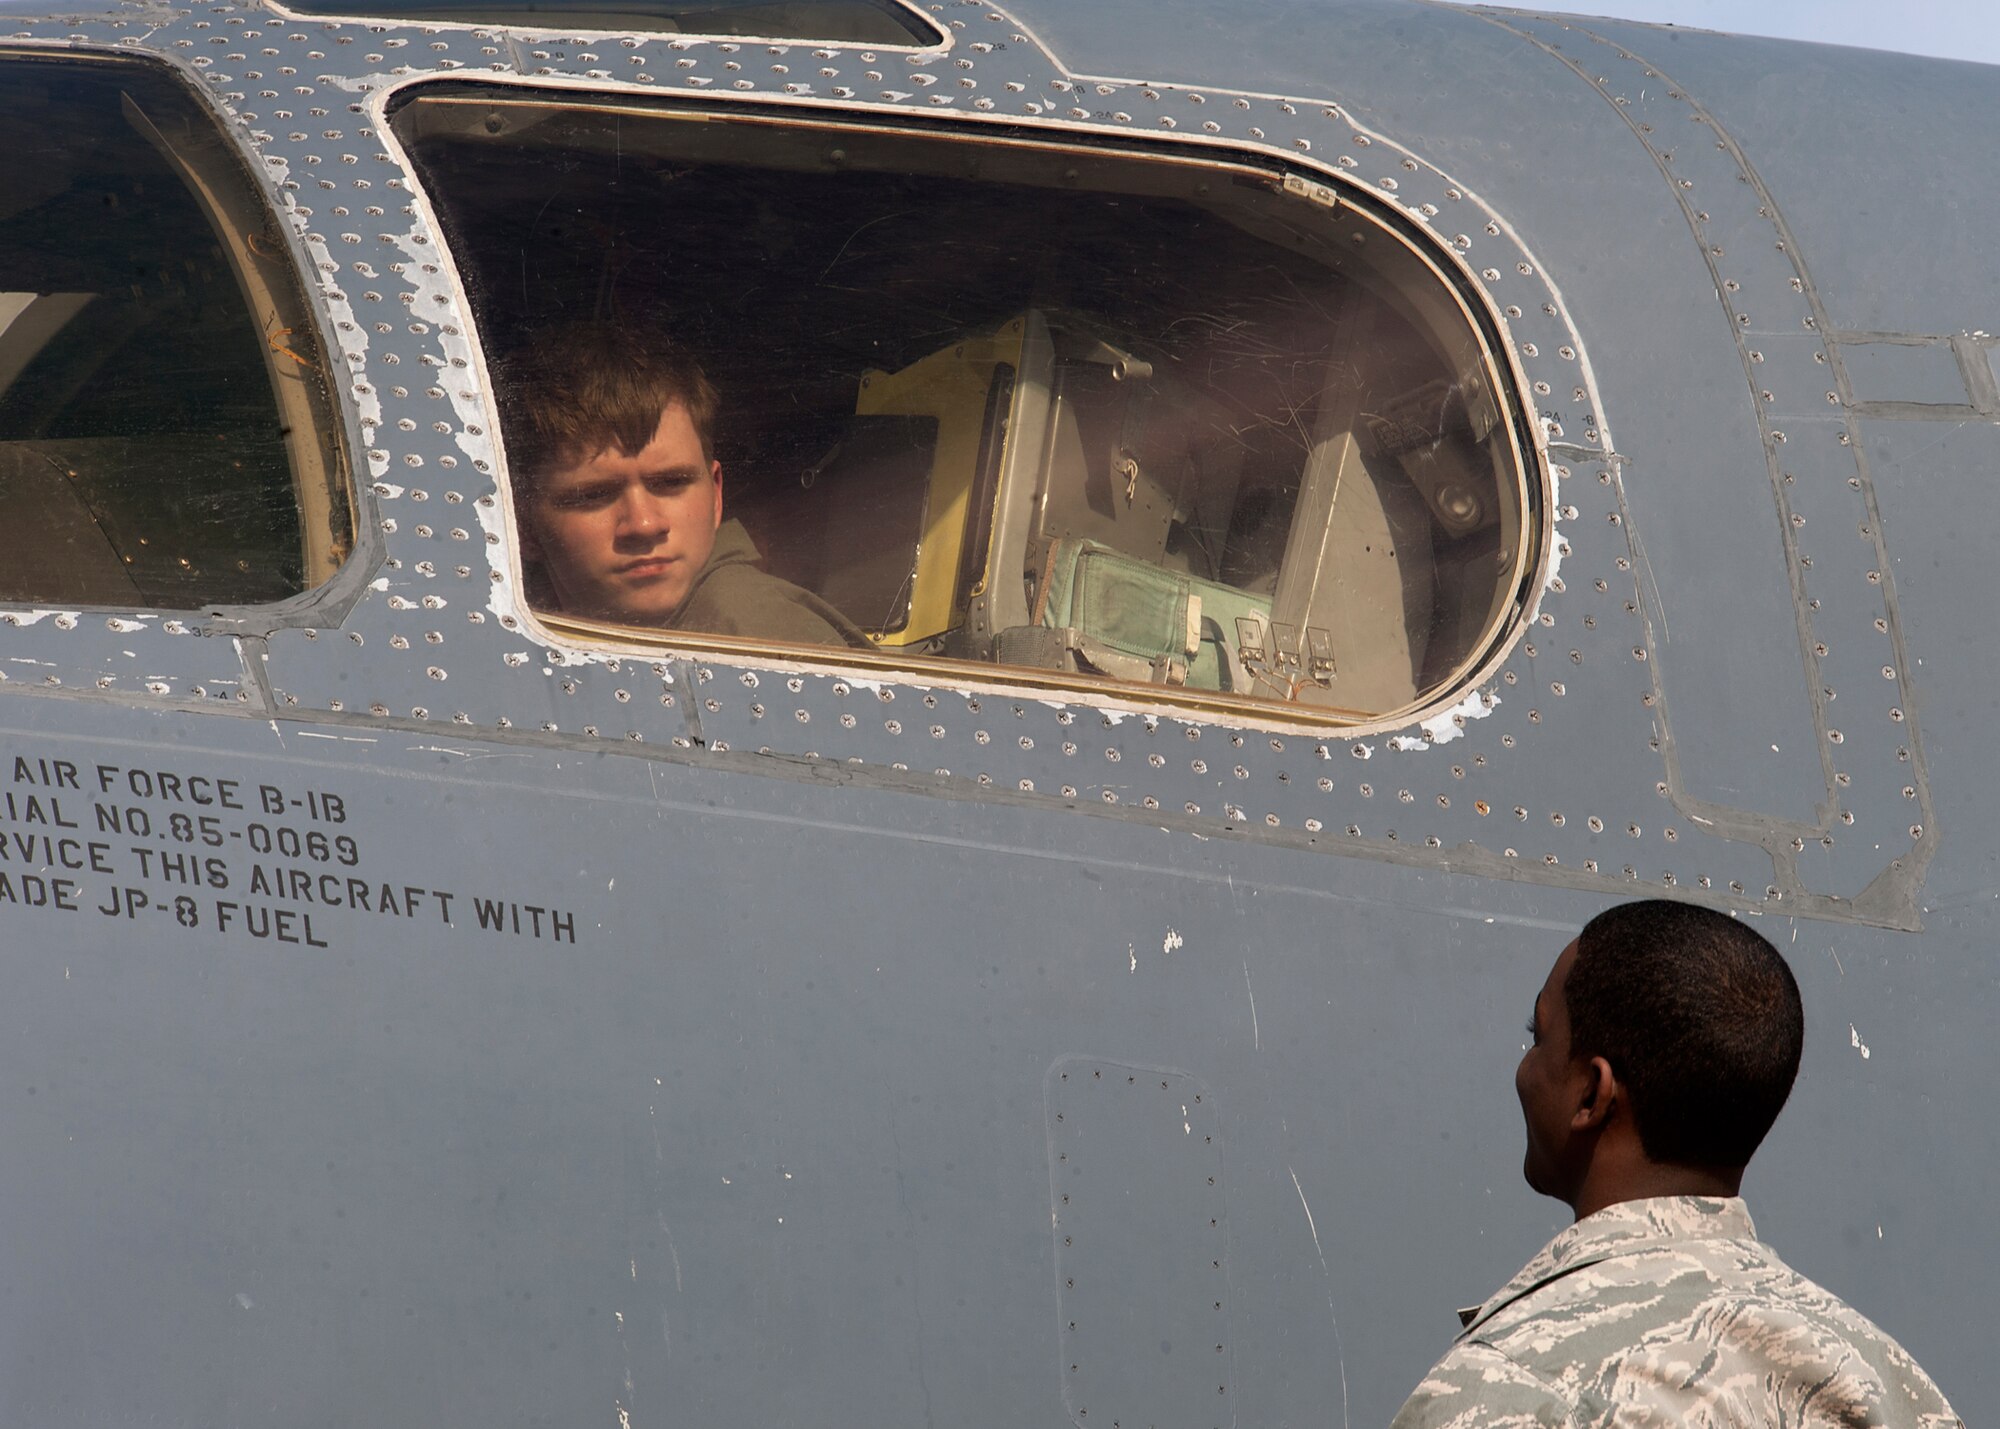 Keegan Vowell, 16-year-old Abilene resident, sits inside a B-1 Bomber during a “Pilot for a Day” tour Jan. 14, 2013, at Dyess Air Force Base, Texas. As part of the program, Keegan received his own flight suit, was demonstrated the capabilities of the 7th Security Forces K-9 Unit, toured the air traffic control tower, taxied a bomber, had his name put onto an aircraft, created his own Hollywood explosion with the 7th Civil Engineer Squadron Explosive Ordinance Disposal Unit and was presented a coin from the base commander. (U.S. Air Force photo by Airman 1st Class Damon Kasberg/ Released)